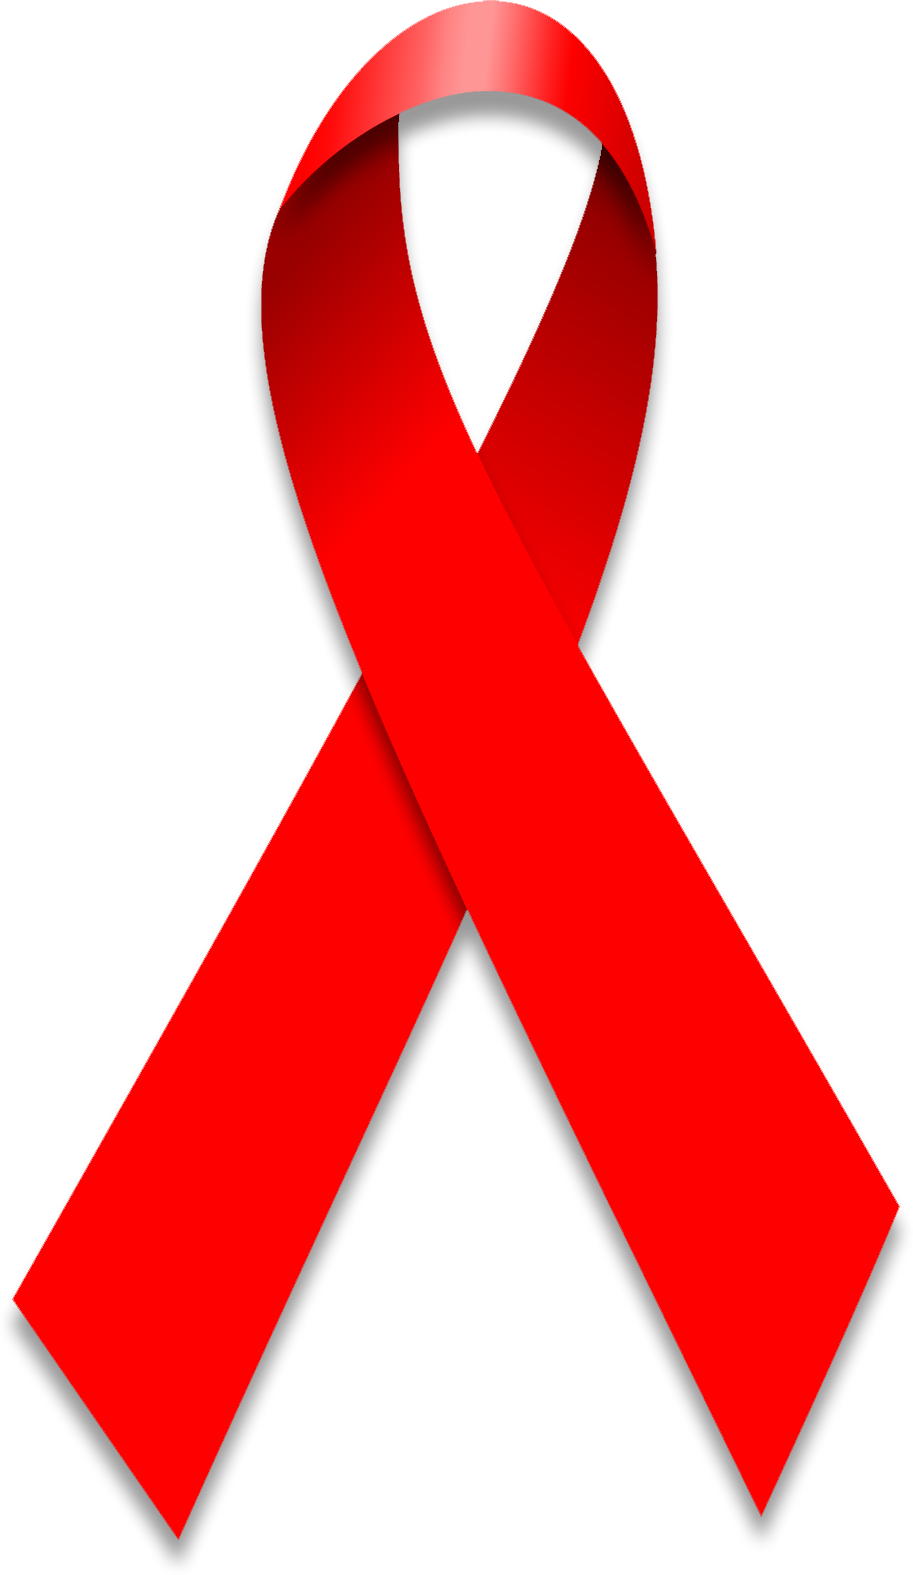 HIV/AIDS Events